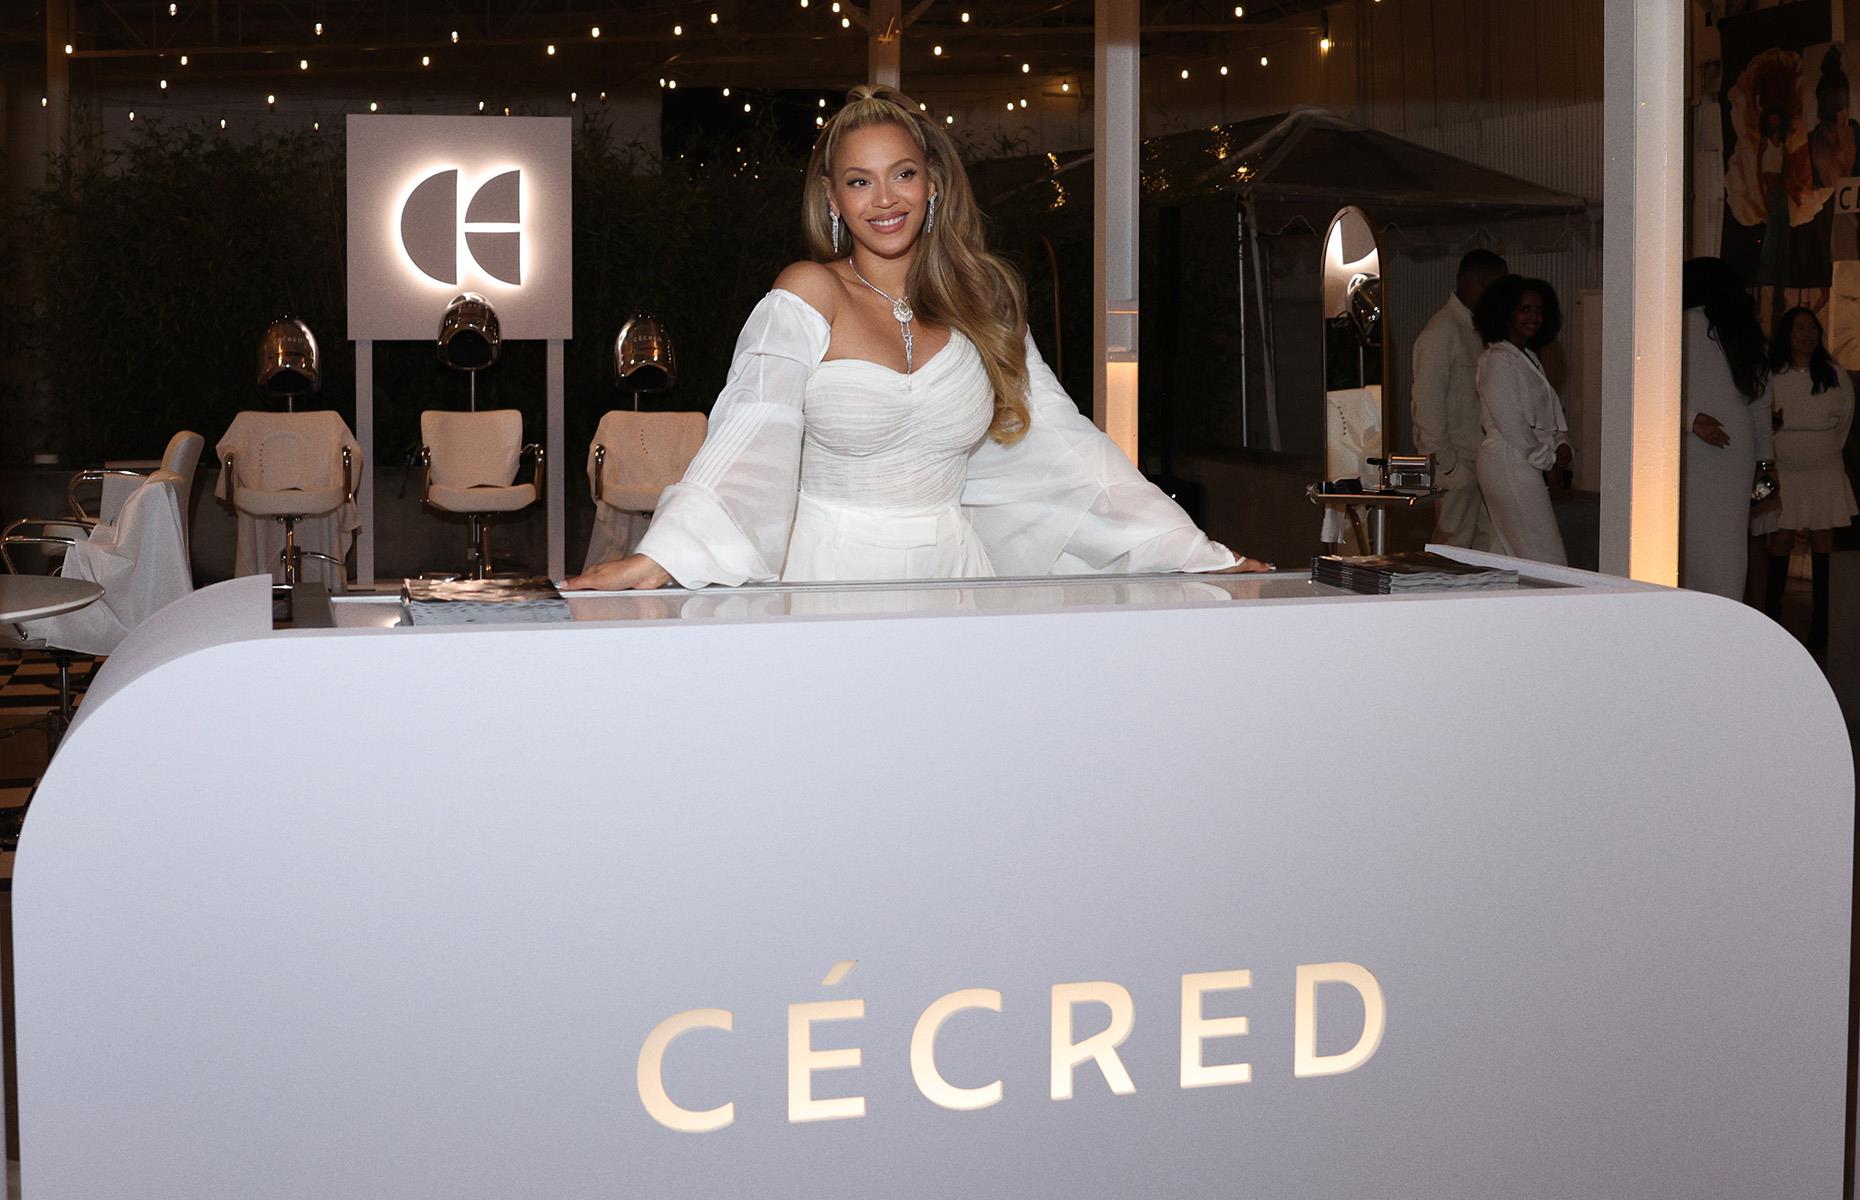 <p>In her latest entrepreneurial move, Beyoncé launched her own haircare line this year. Called Cécred, the brand offers a variety of haircare products, including shampoos, conditioners, masks, and oils. Prices for haircare bundles range from a modest $42 to a steeper $265, according to <em>Forbes.</em></p>  <p>Commenting on the motivation behind launching the brand, Beyoncé said, “I grew up sweeping hair in my mother’s salon; so much of who I am comes from there. I saw how she transformed hair by mixing mainstream products with textured haircare.”</p>  <p>To celebrate the launch of her brand, Beyoncé is giving away $500,000 in cosmetology scholarships and salon grants through her BeyGood charitable foundation. The grants will support cosmetology students and salon owners in five markets, providing both scholarships and business grants.</p>